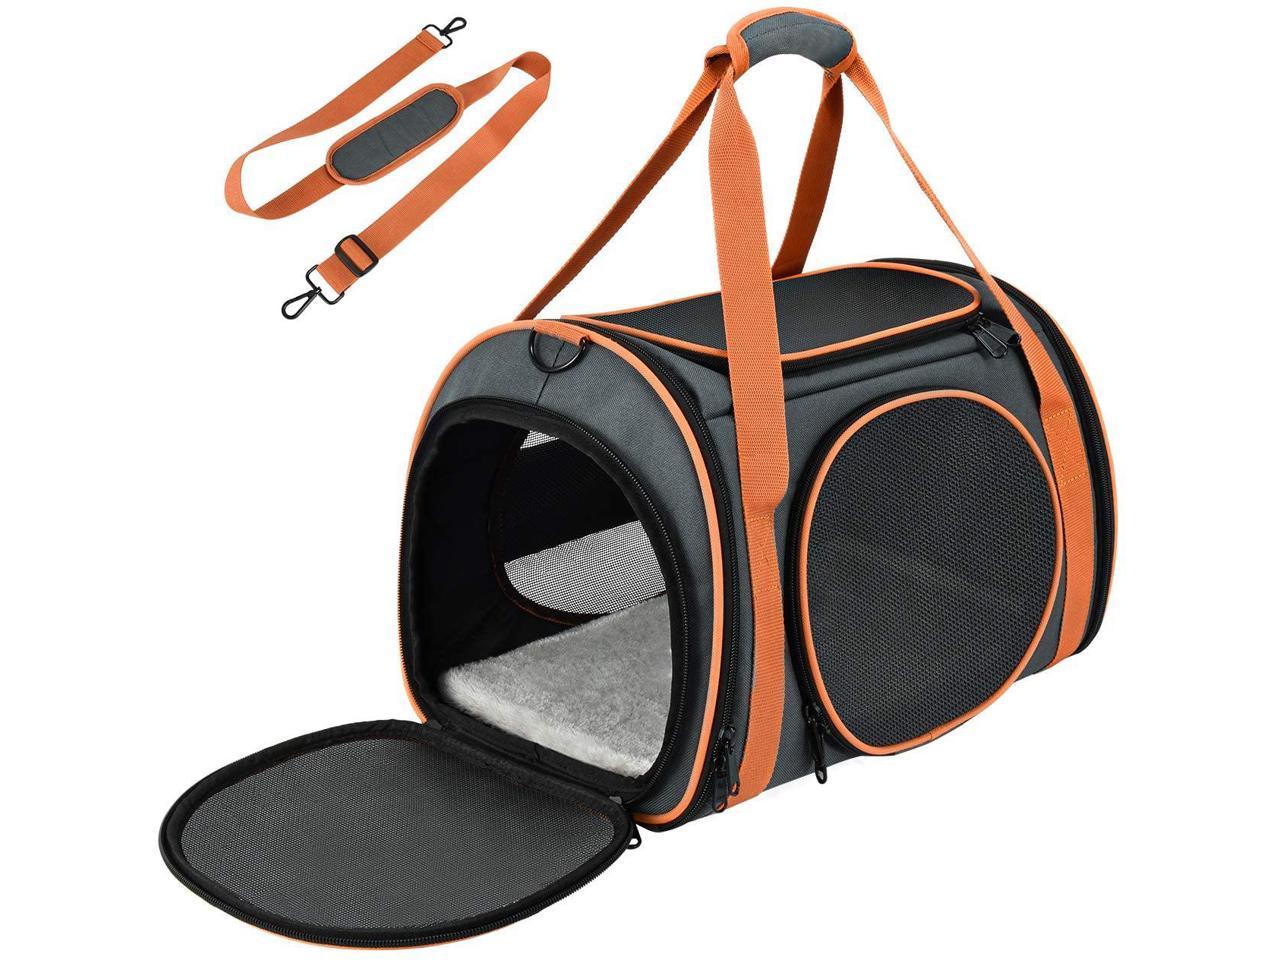 Portable Folding Pet Carrier Airline Approved SOUNDY Pet Carrier for Cat and Dog 